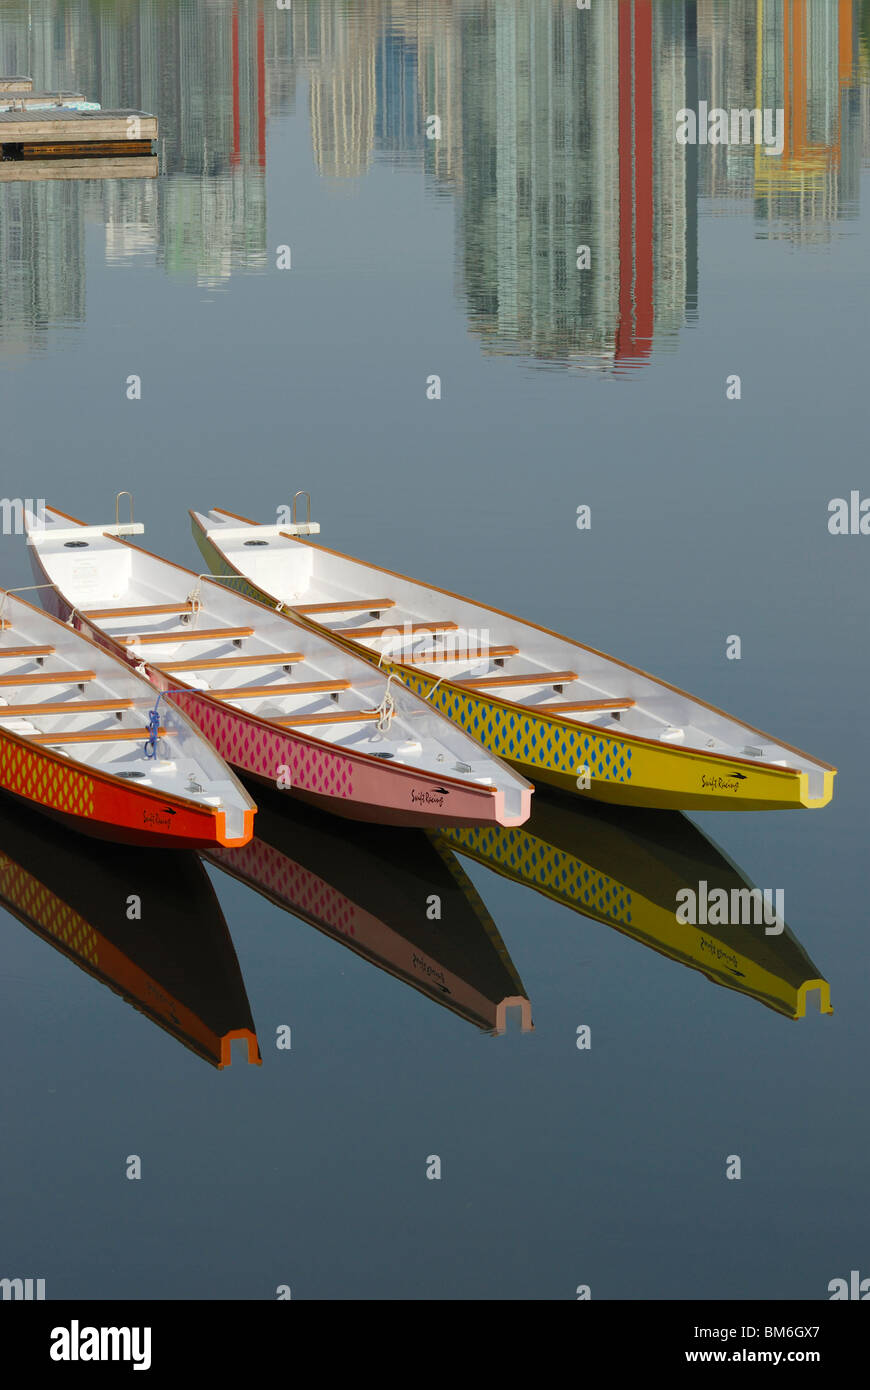 Ten person Dragon Boats sitting empty with reflections of itself and city buildings in the waters of False Creek Vancouver City. Stock Photo